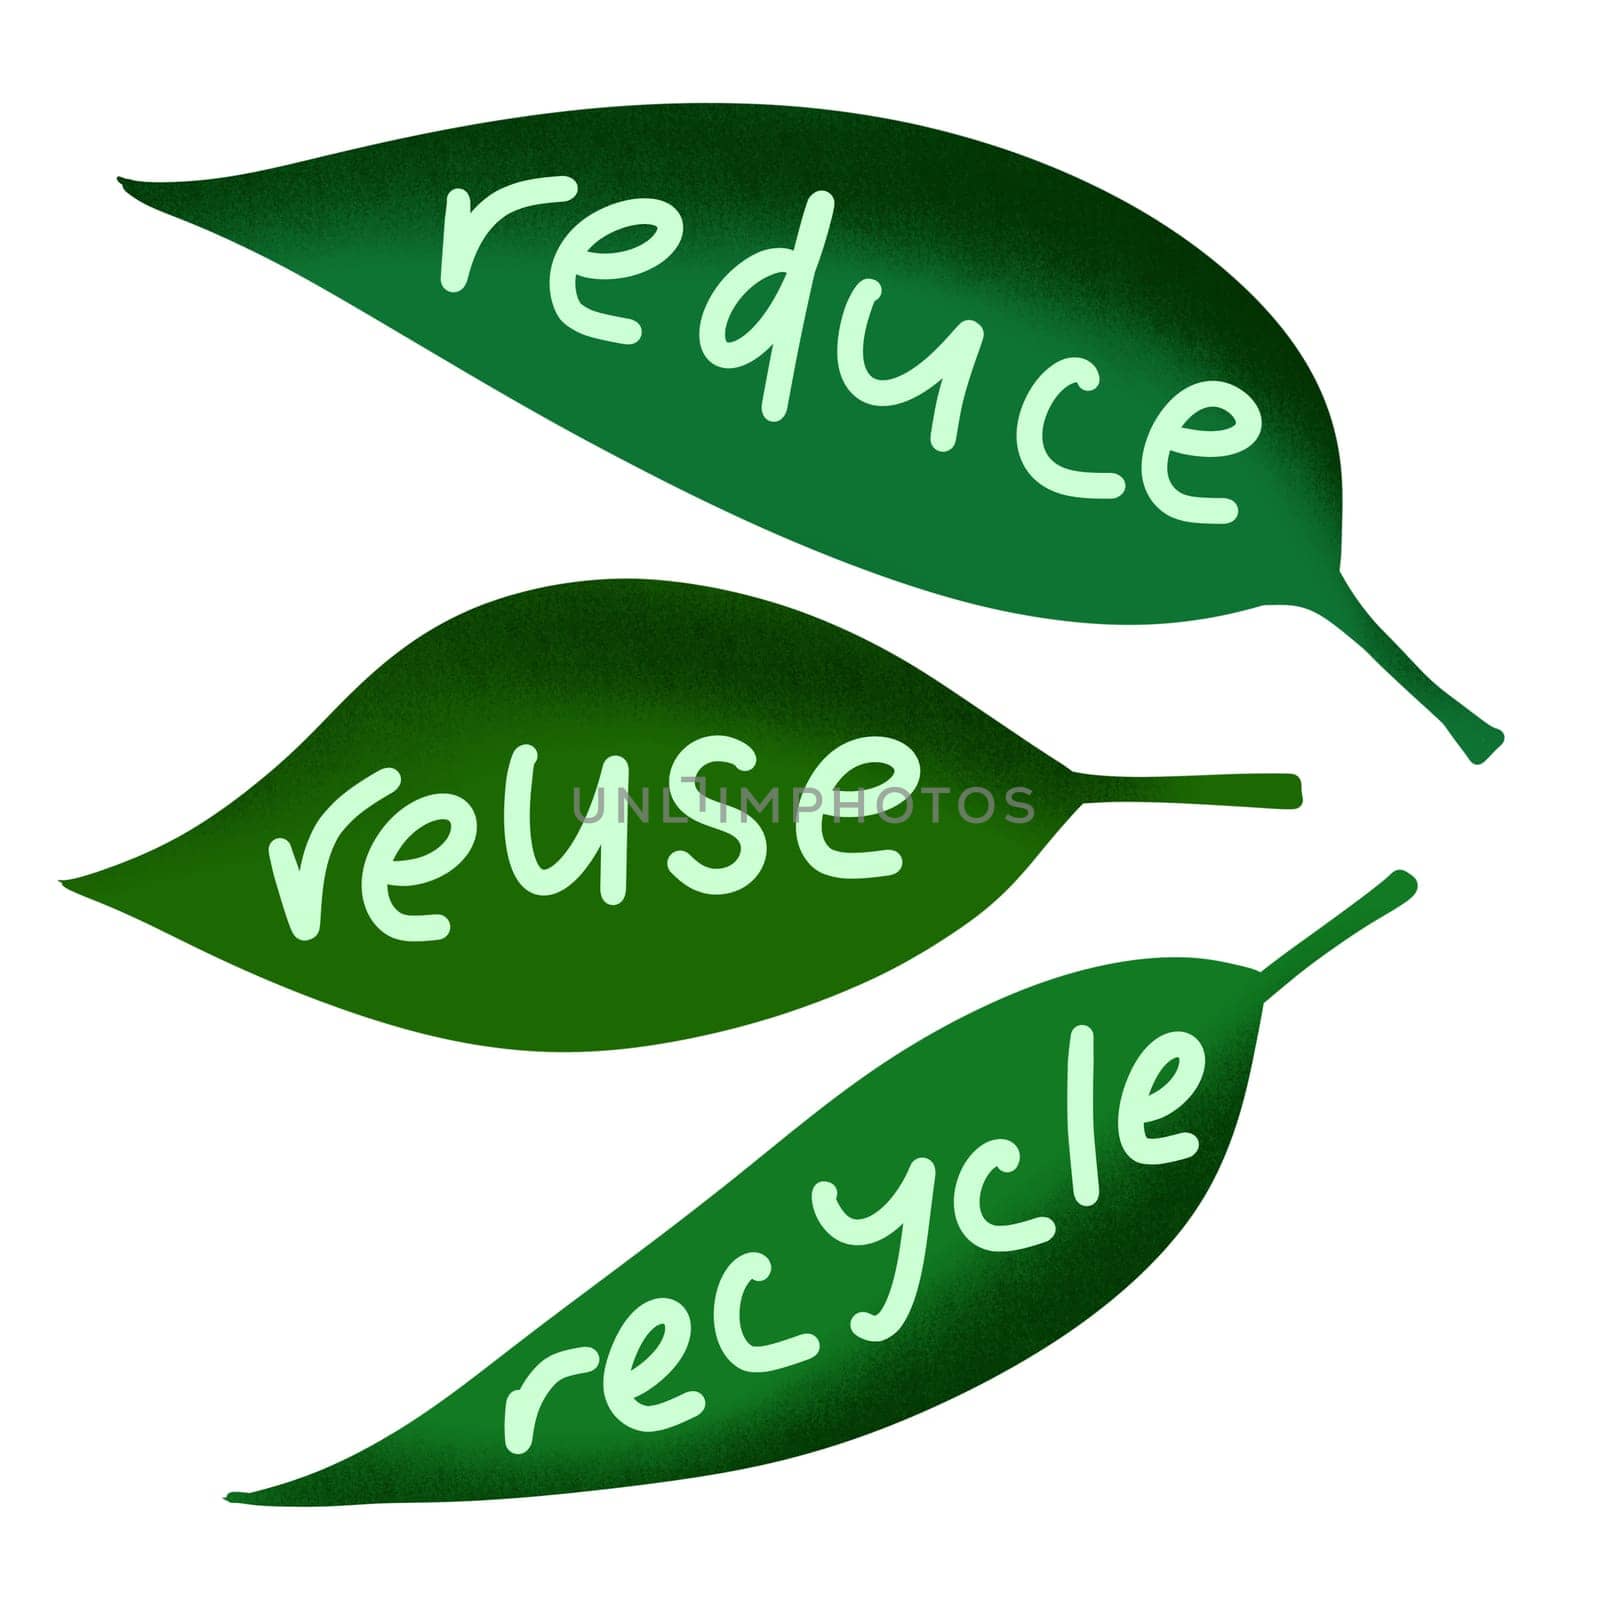 Hand drawn illustration of reduce reuse recycle ecological concept on green leaf leaves. Environment protection slogan, waste garbage control, organic ecology recycling icon logo. by Lagmar